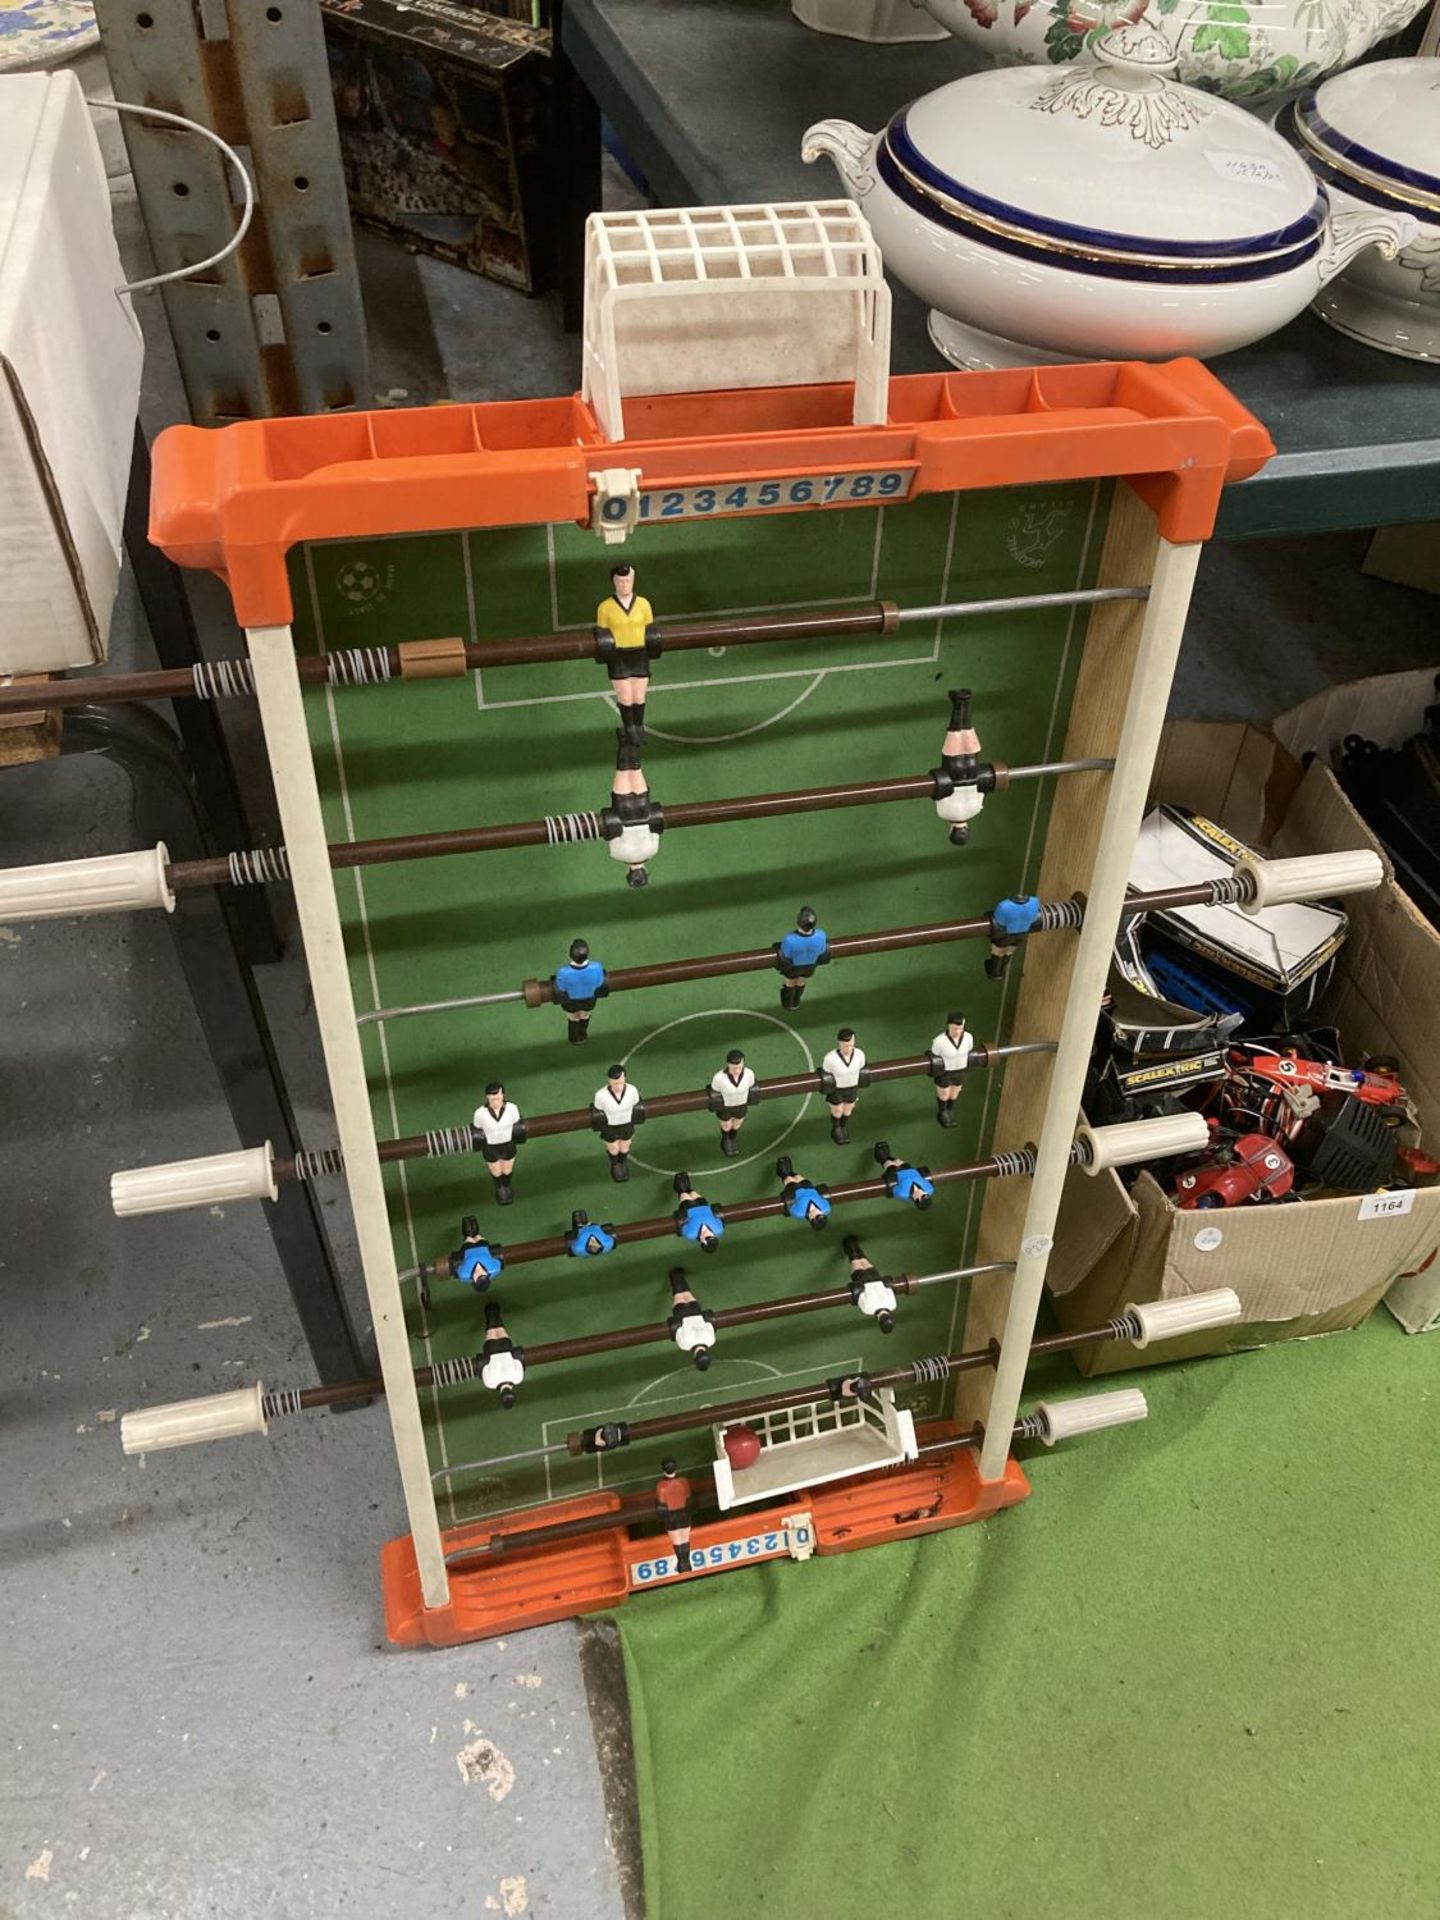 A VINTAGE TABLE SOCCER GAME - ONE PLAYER HAS LOST HIS HEAD, WIDTH 45CM, LENGTH APPROX 89CM